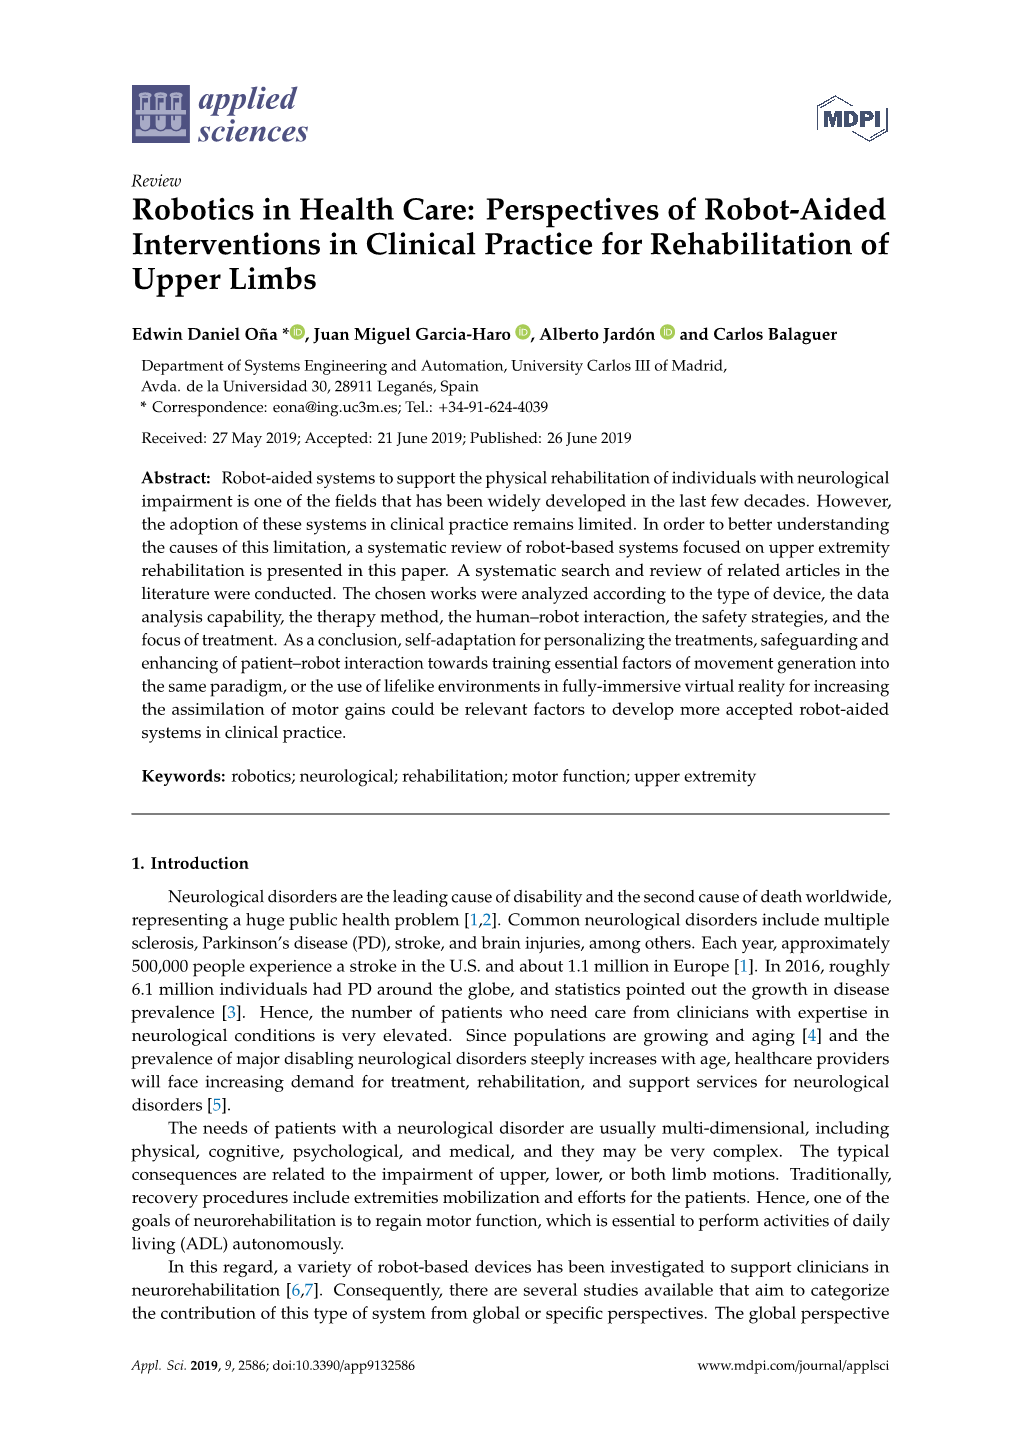 Robotics in Health Care: Perspectives of Robot-Aided Interventions in Clinical Practice for Rehabilitation of Upper Limbs